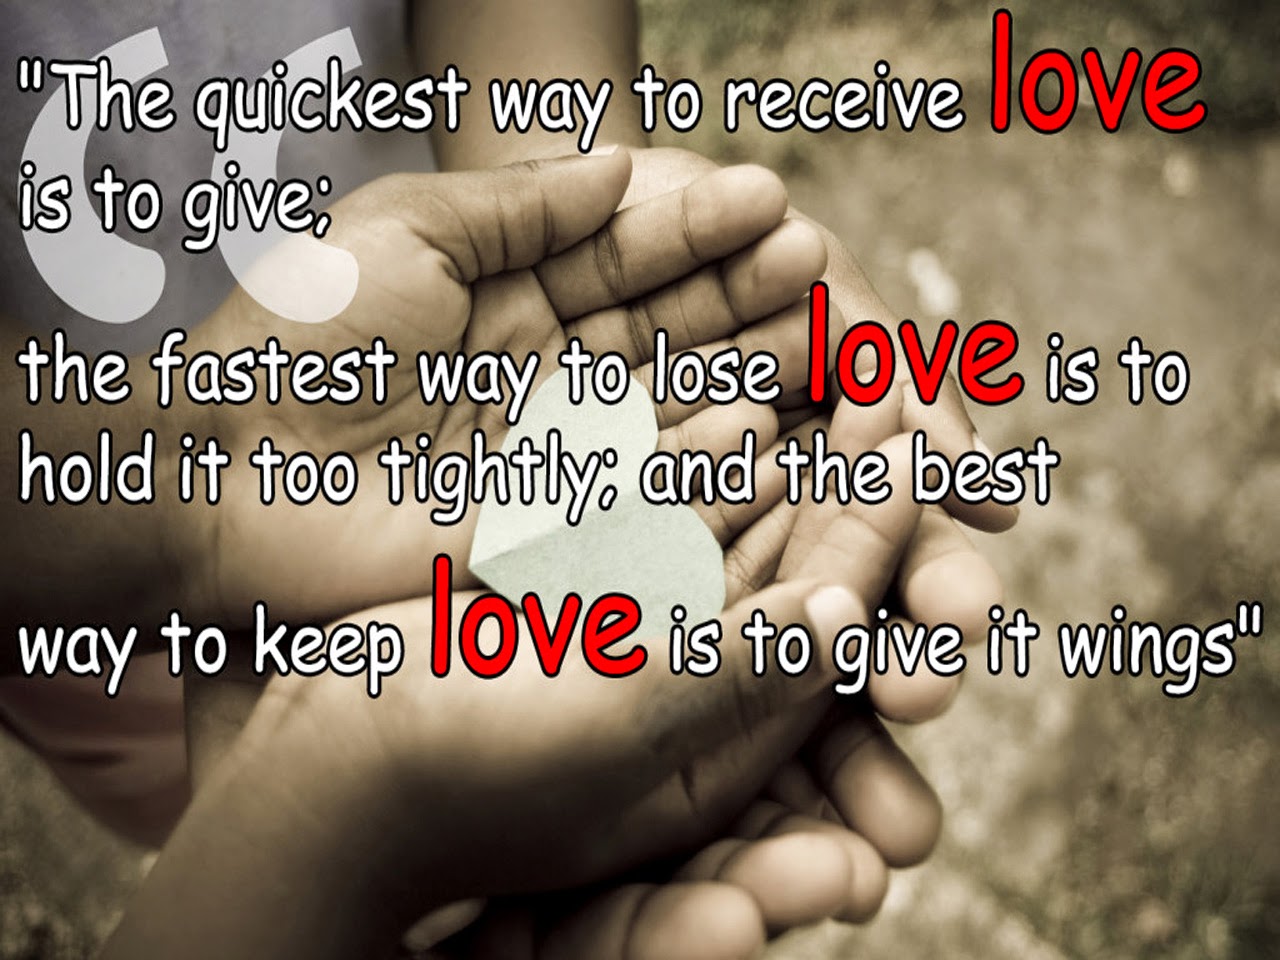 "The quickest way to receive love is to give the fastest